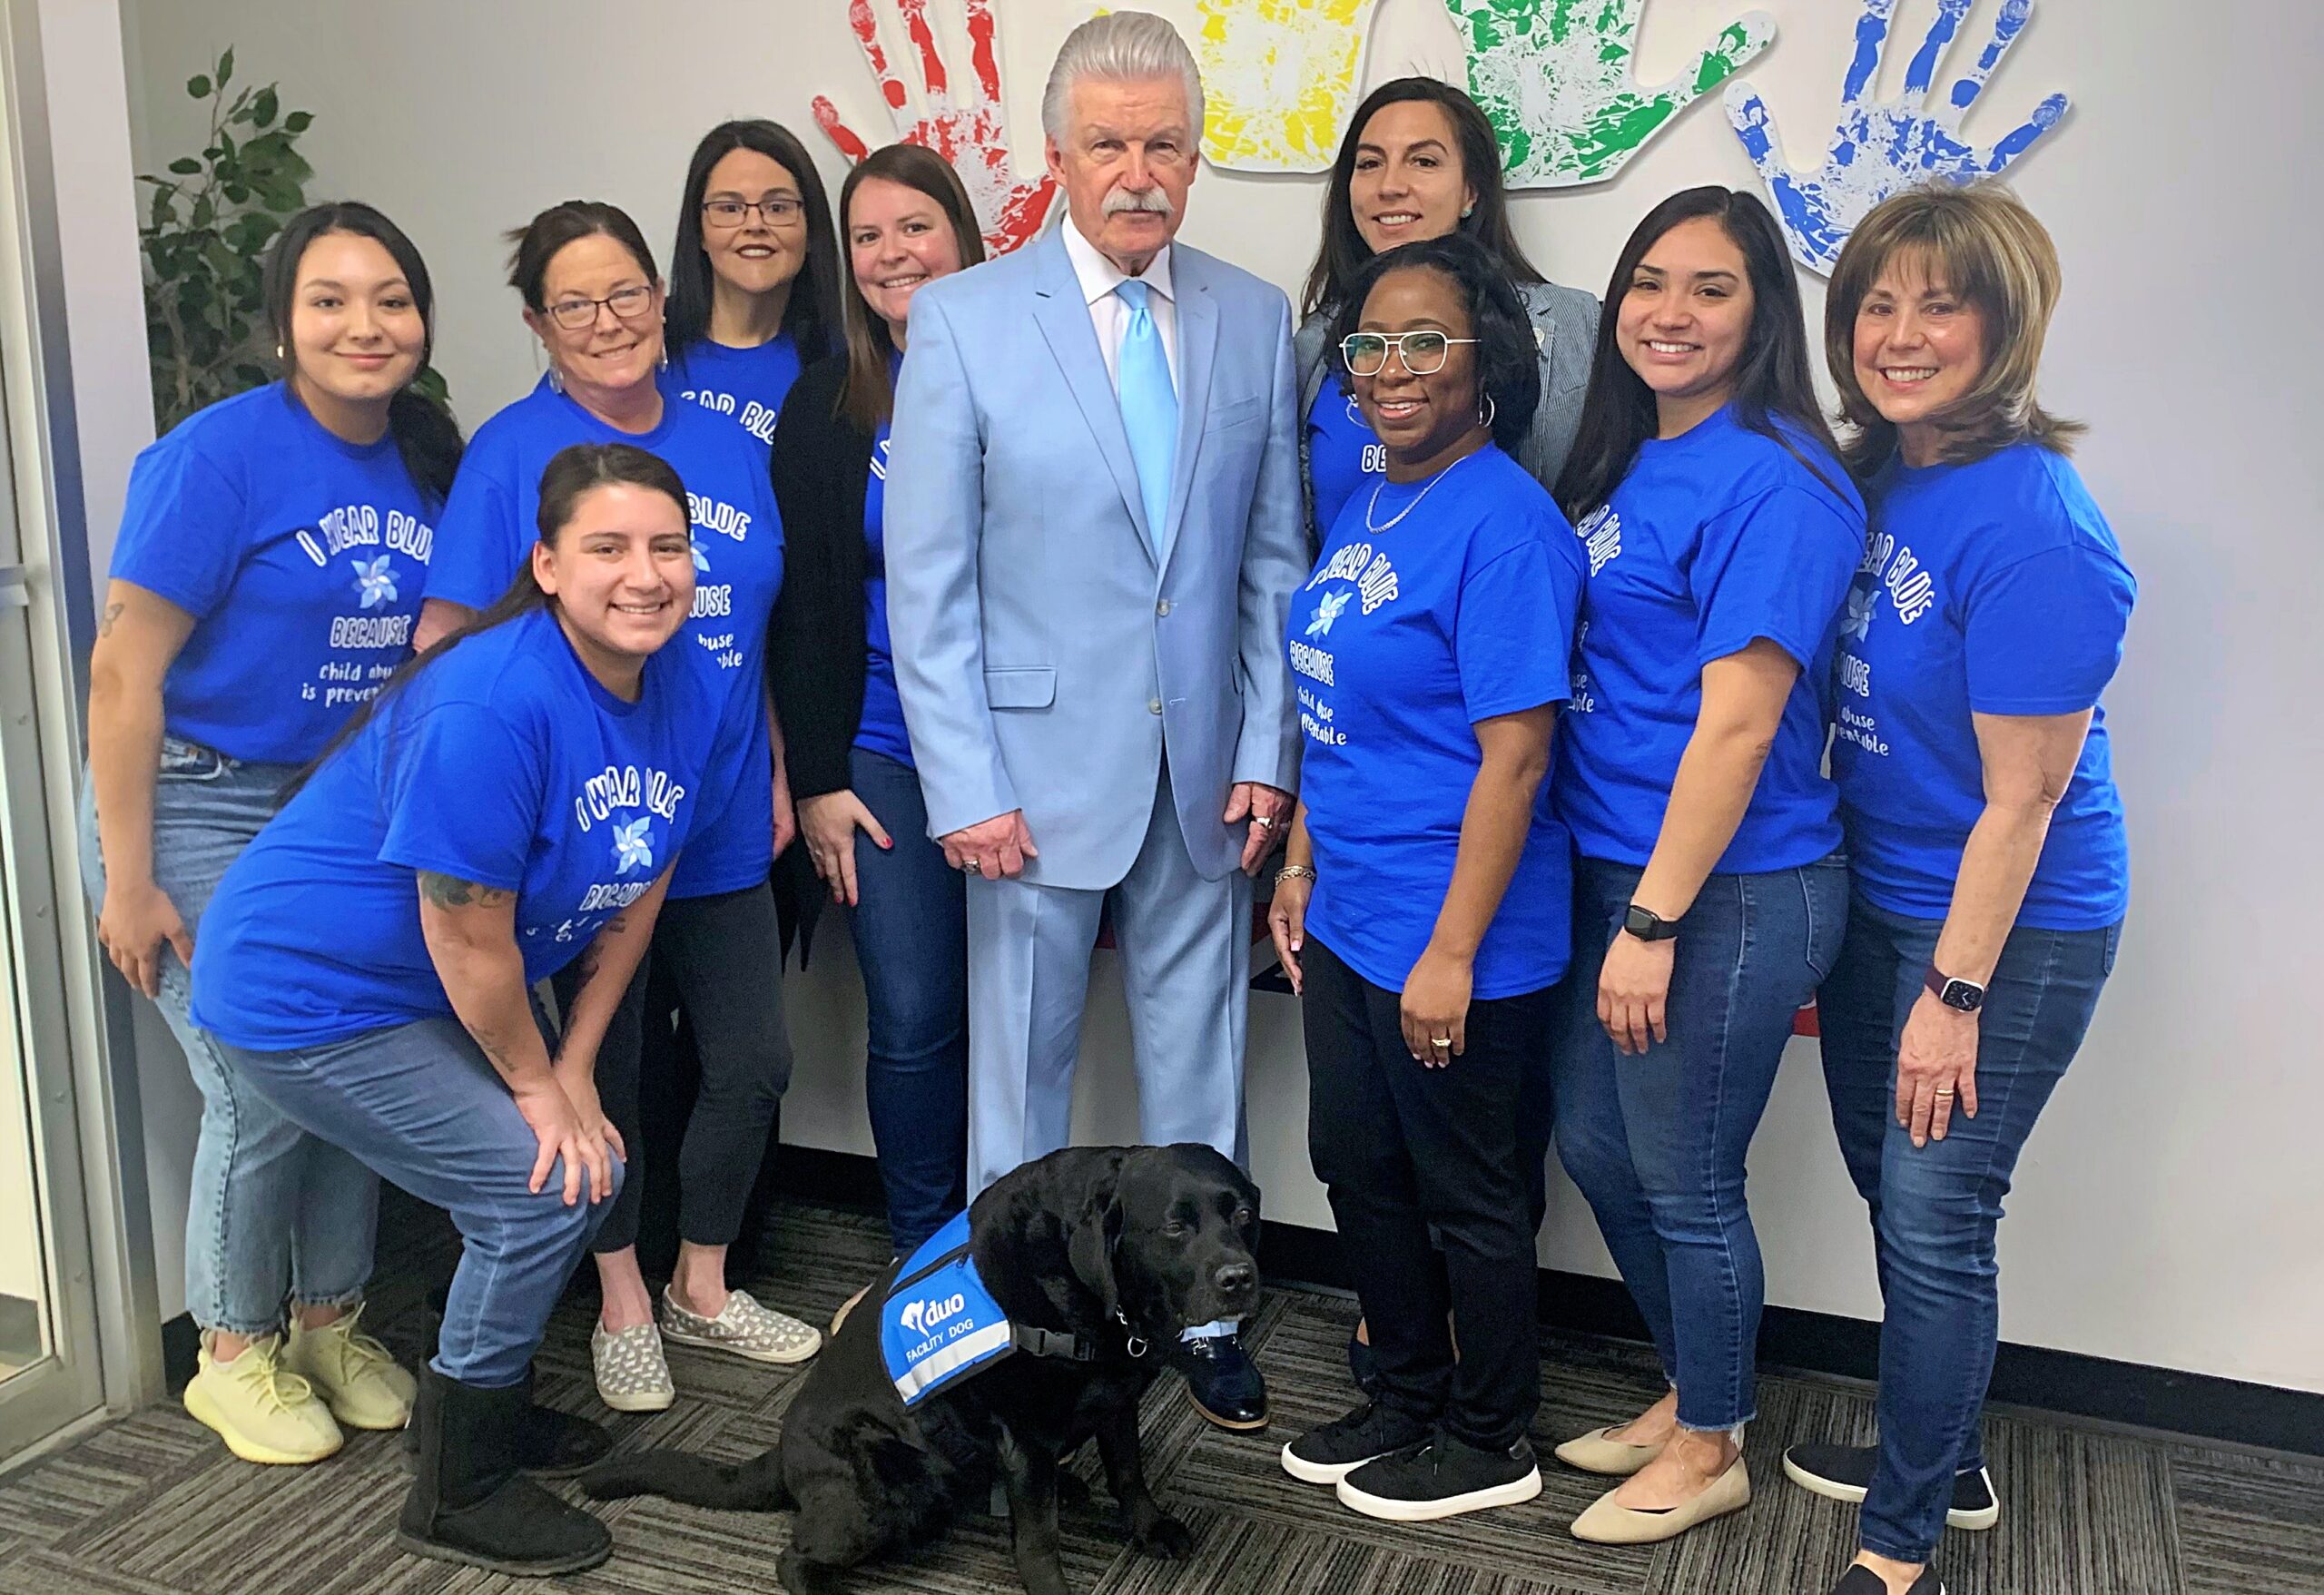 Will County CAC employees, dressed in “I Wear Blue Because Child Abuse is Preventable” t-shirts & facility dog Kiwi in her blue vest, in honor of #ChildAbusePreventionMonth, enjoyed a visit by our founder/board chair Will County State's Attorney Jim Glasgow -- also wearing blue! 💙
#NationalChildAbusePreventionMonth #ChildAbusePrevention